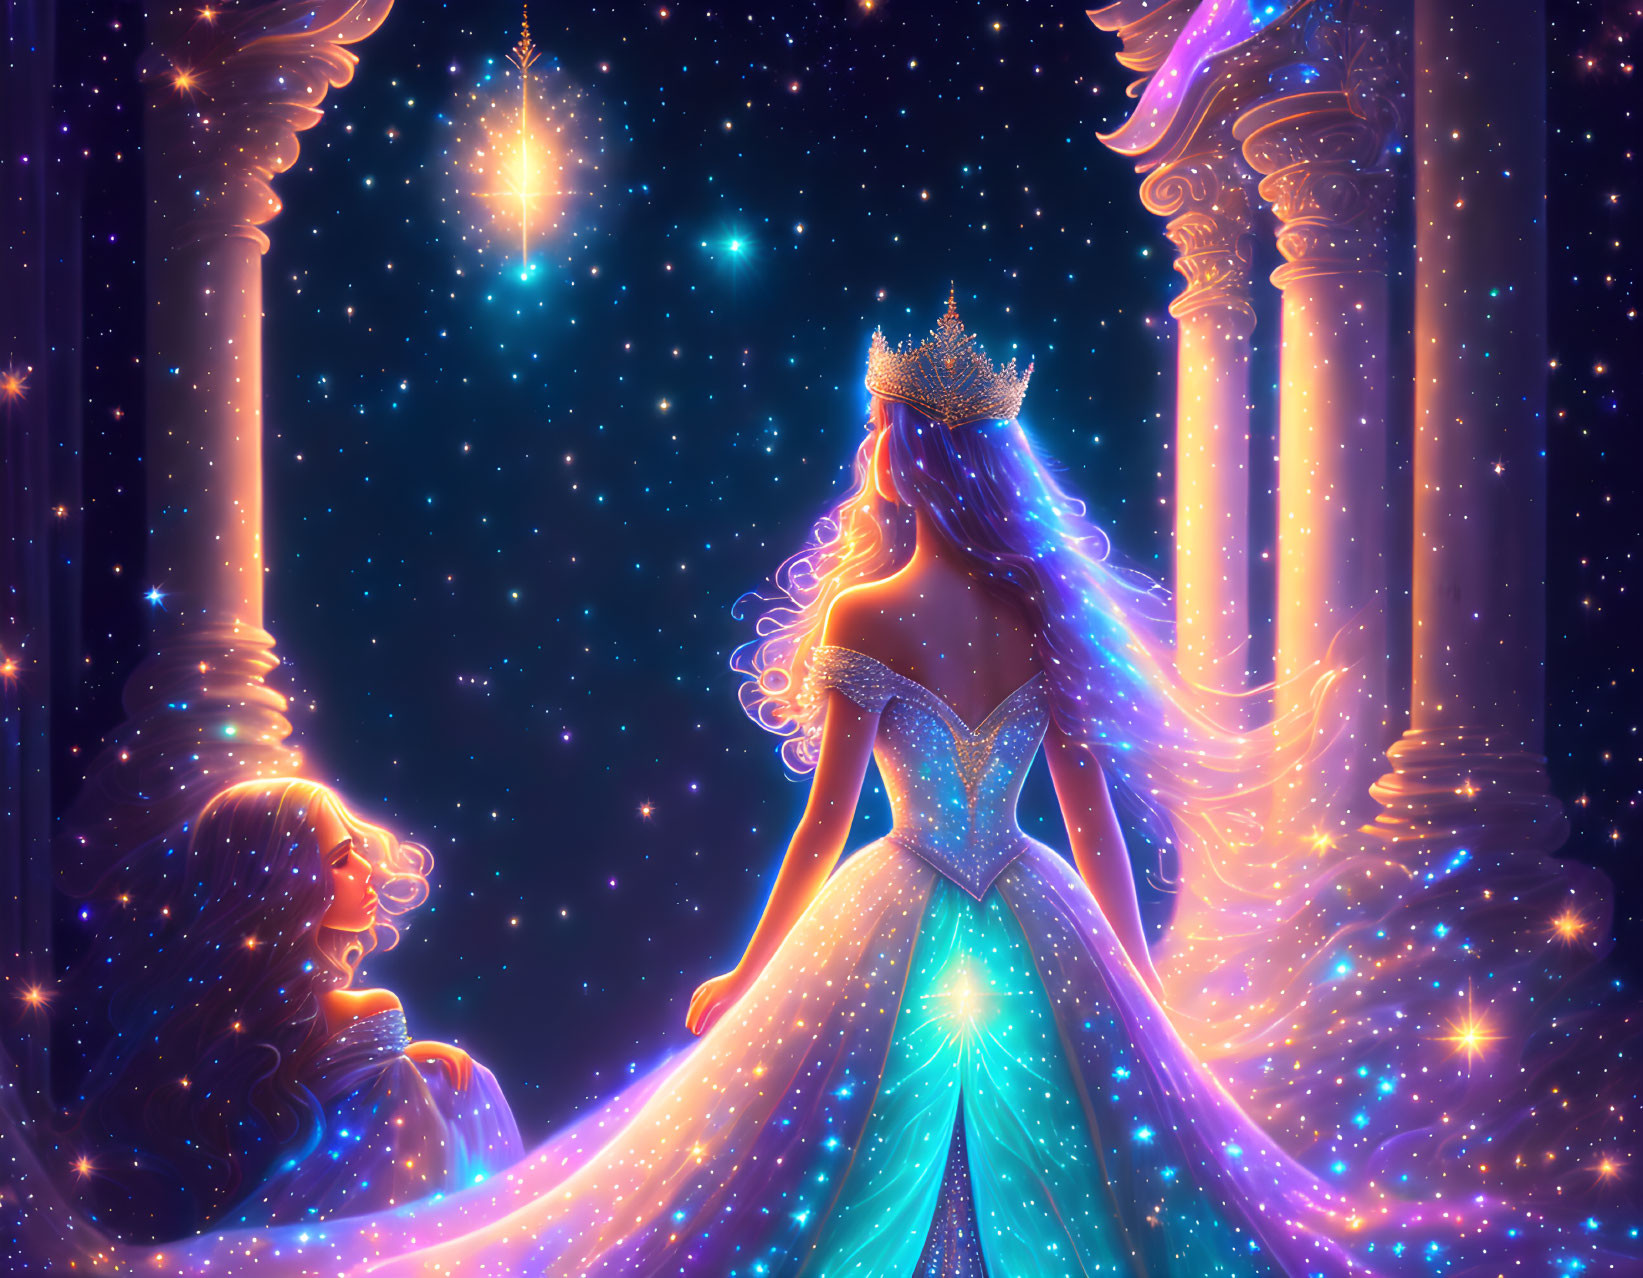 Illustrated princess in blue gown under starry sky with magical glow.